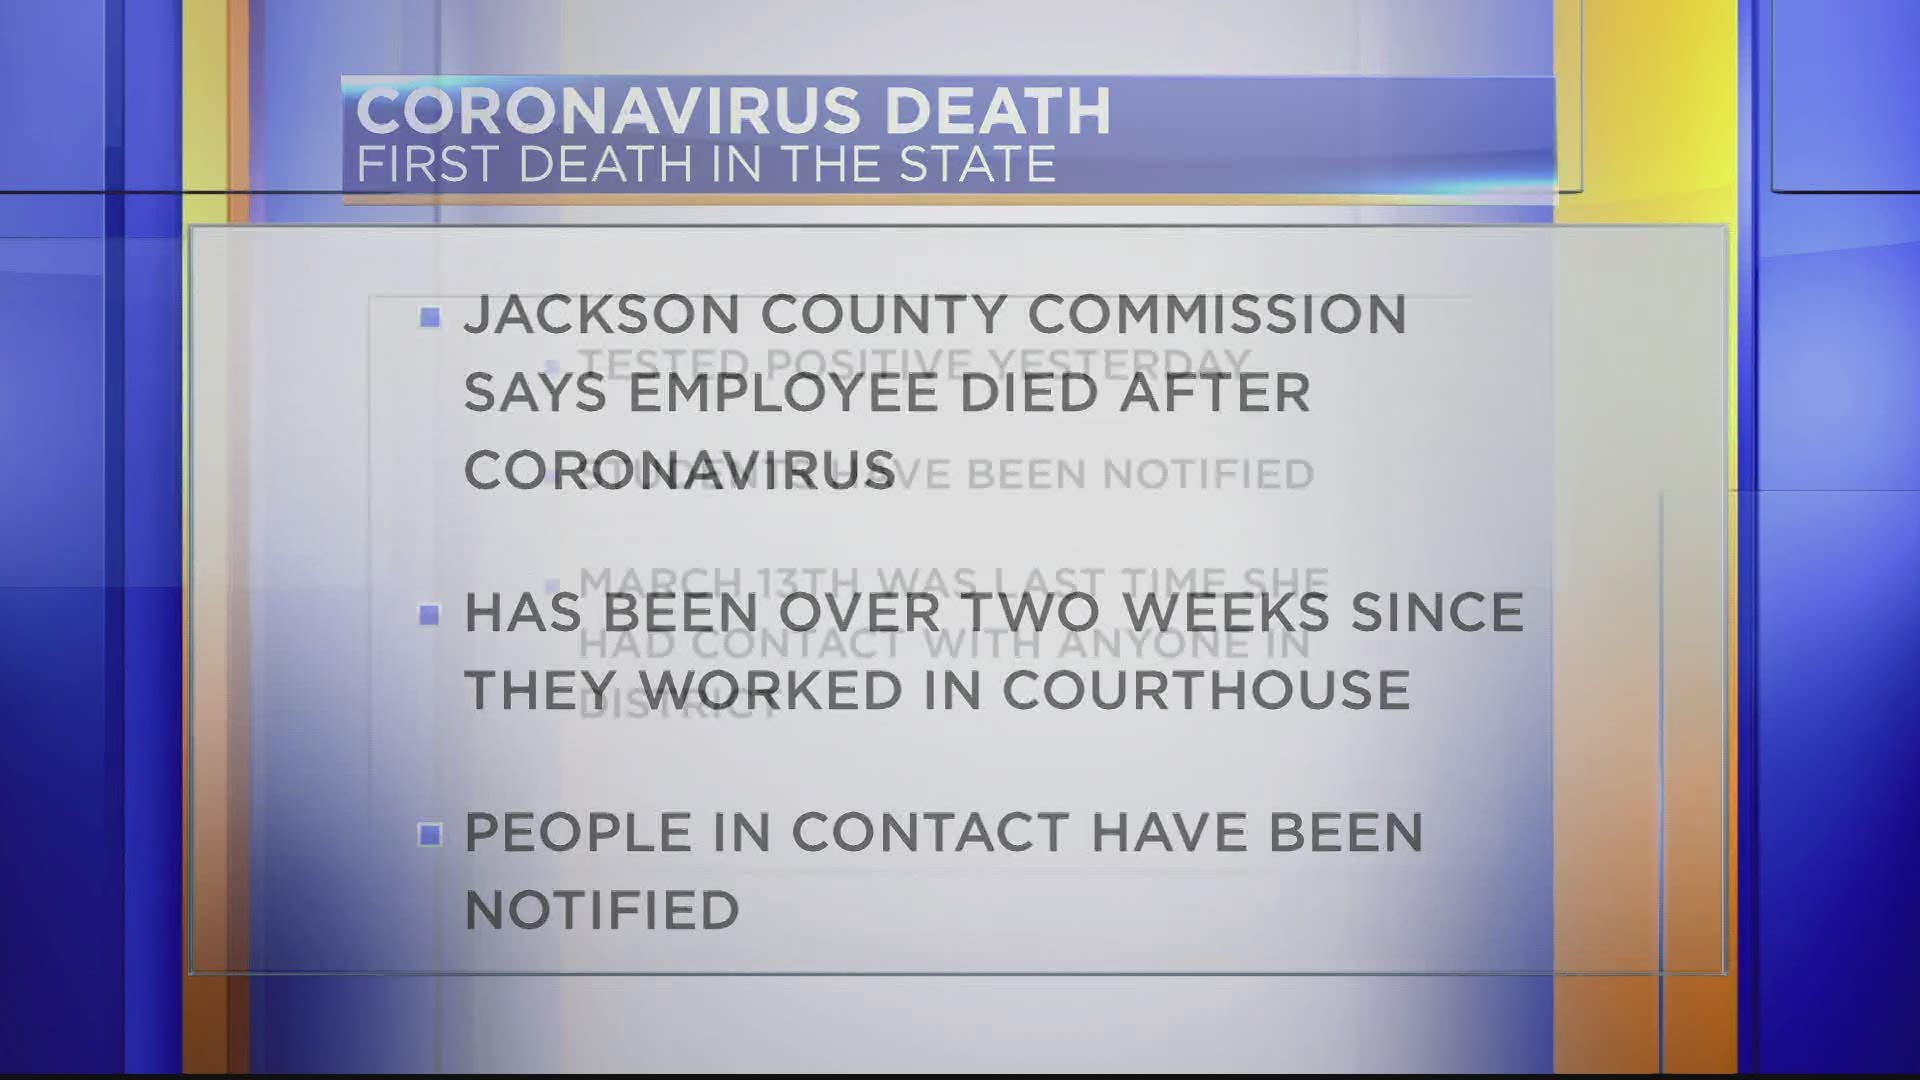 An employee at the Jackson County courthouse is the first announced coronavirus death in Alabama.